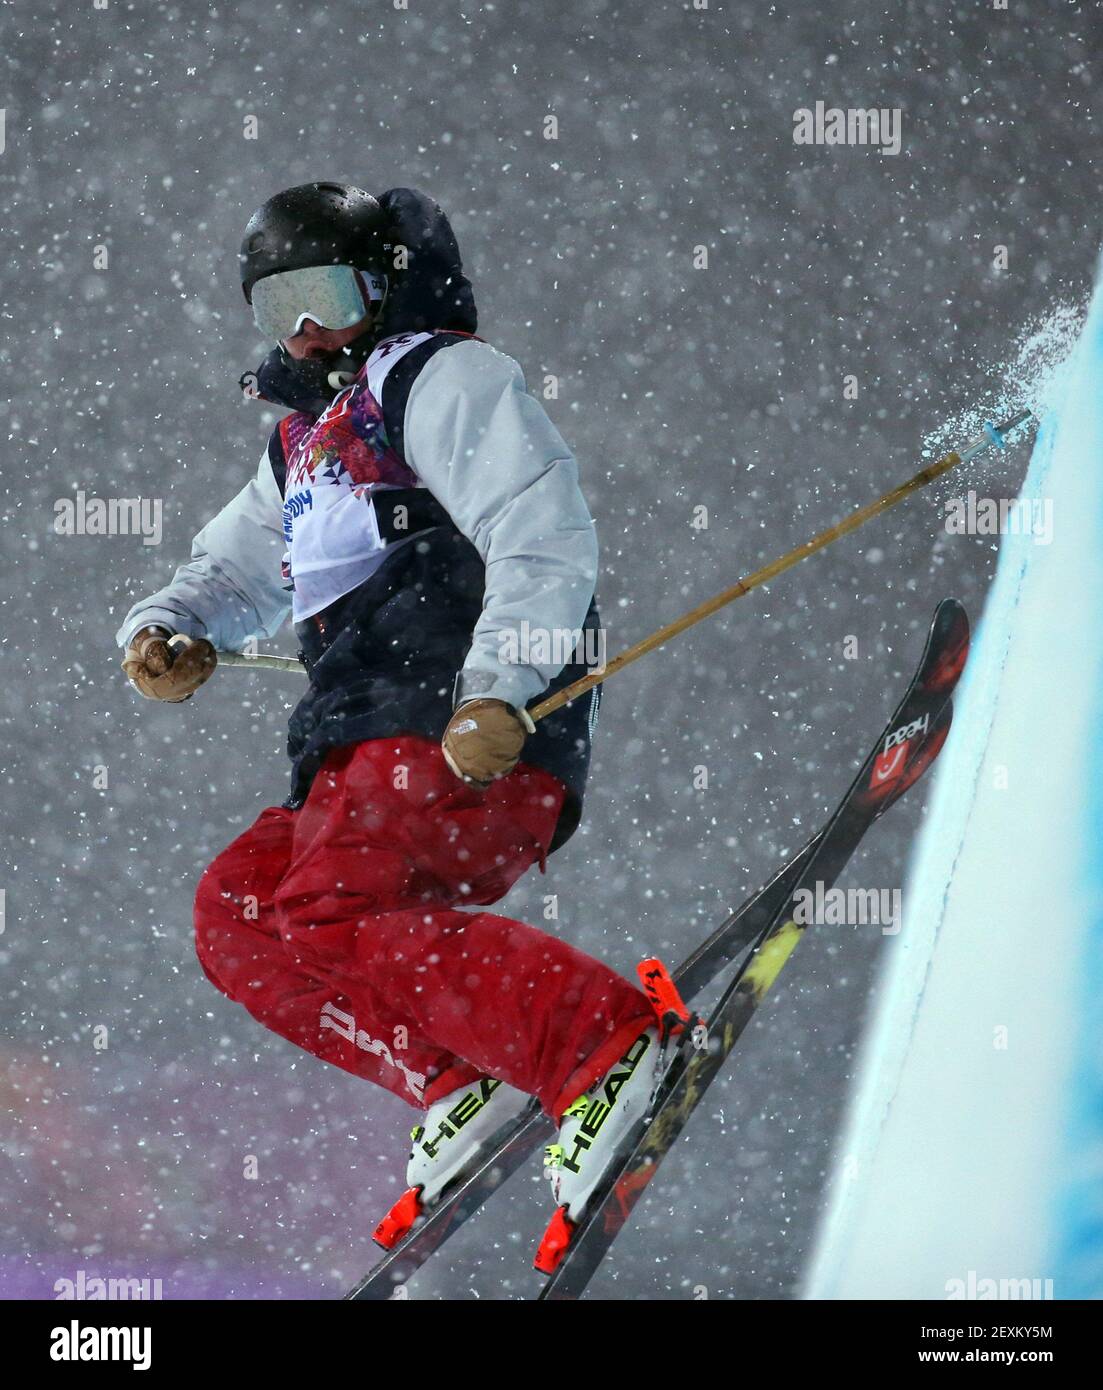 Aaron Blunch of the USA skis in the finals of the men's ski halfpipe at Rosa Khutor Extreme Park during the Winter Olympics in Sochi, Russia, Tuesday, Feb. 18, 2014. (Photo by Brian Cassella/Chicago Tribune/MCT/Sipa USA) Stock Photo